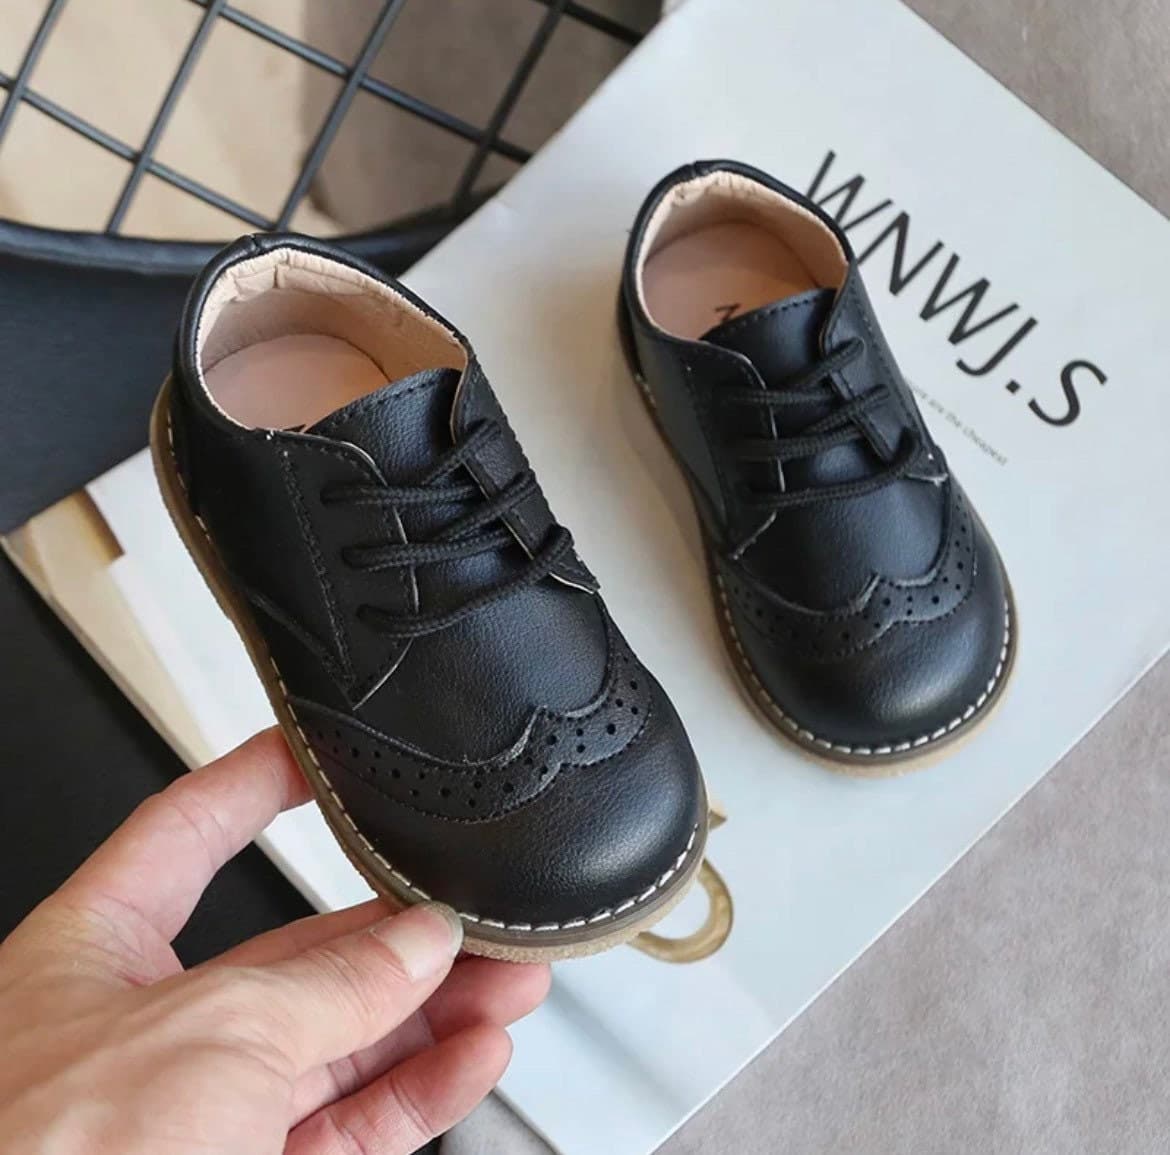 Toddler Oxford Shoes.